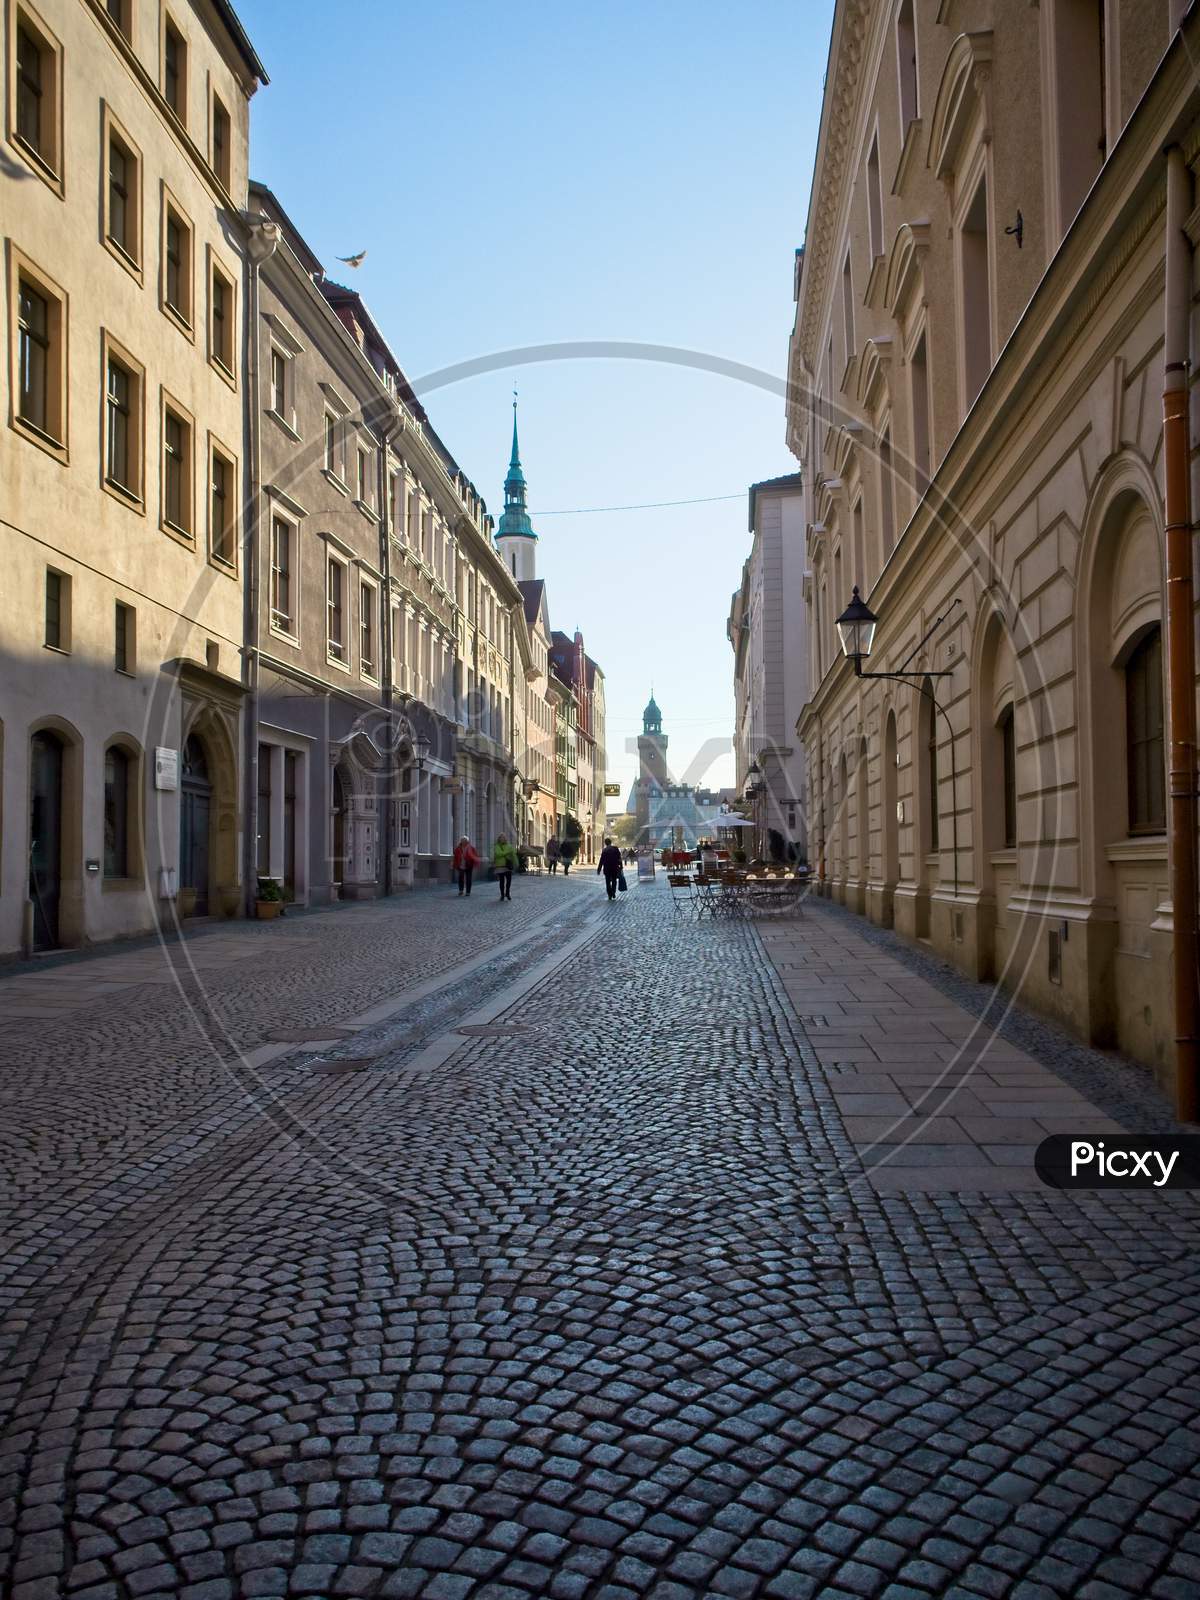 Cobblestone street in the old town of Goerlitz, Germany.